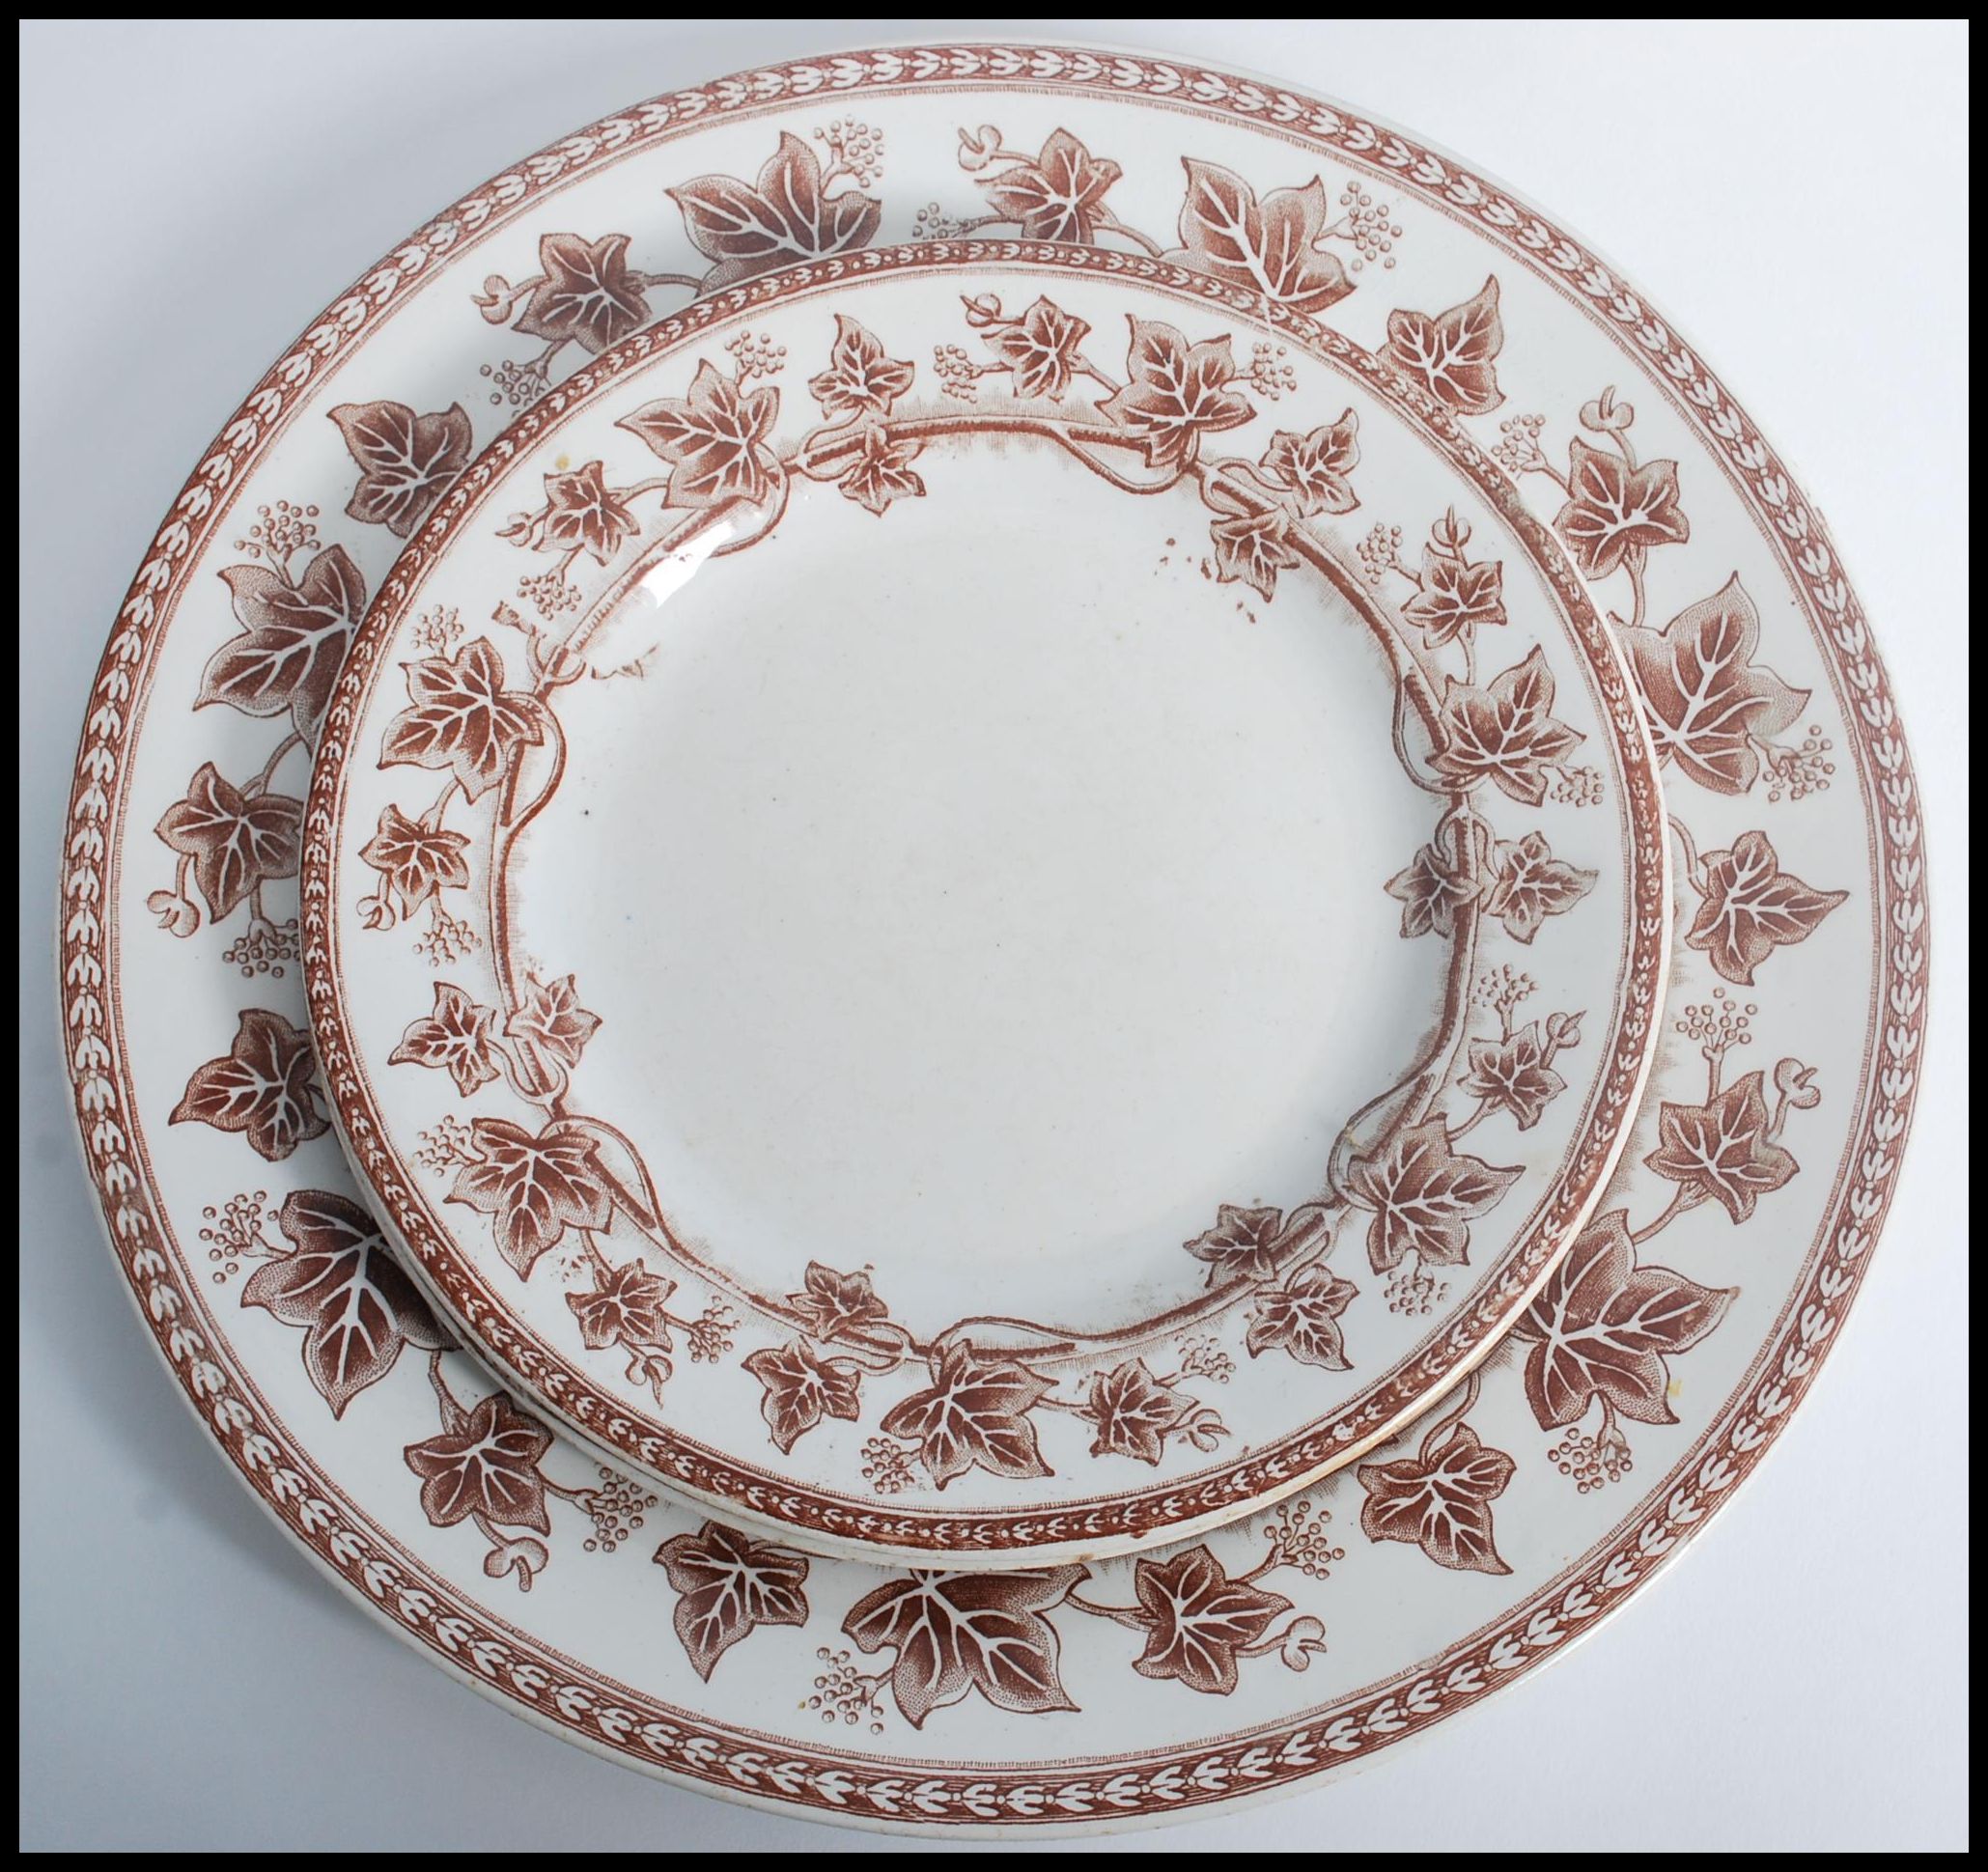 A 19th century Victorian Wedgwood Ivy pattern dinner service consisting of tureens, plates - Image 6 of 8